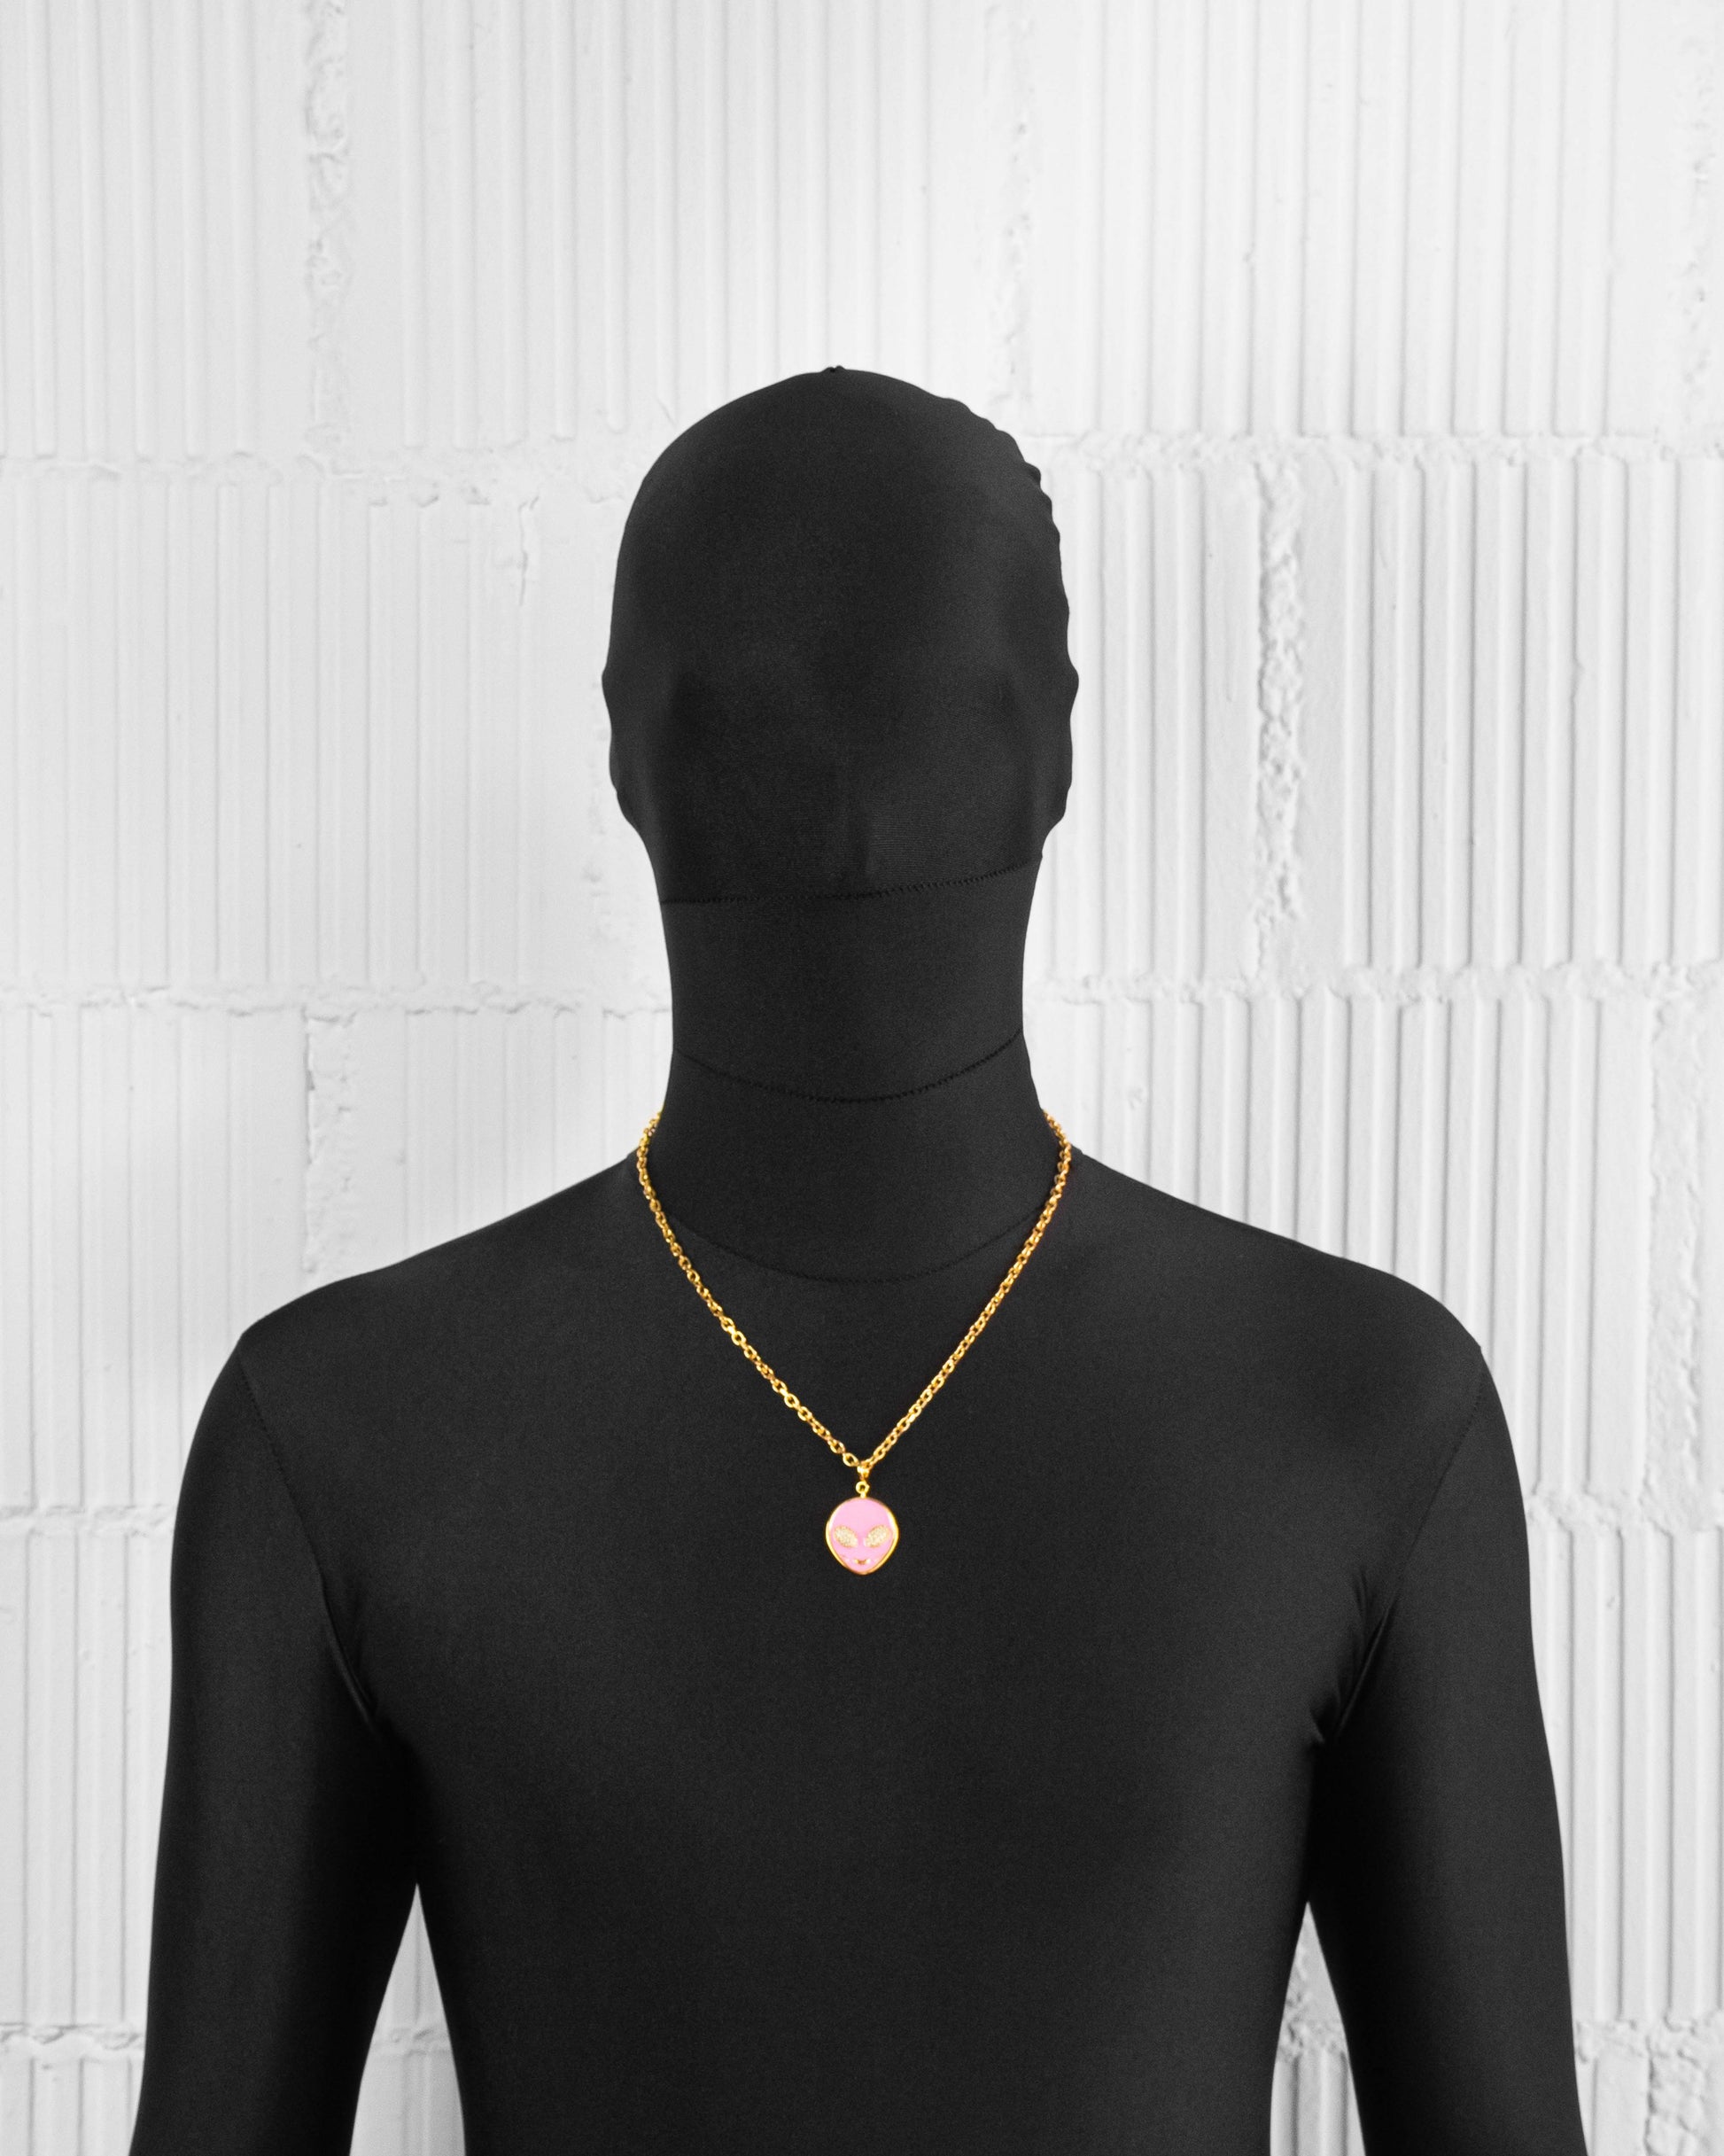 man with black suit wearing 18k yellow gold coated alien pendant necklace with hand-set micropavé stones in pink hand painted glow in the dark alien pendant and 3mm rolo chain